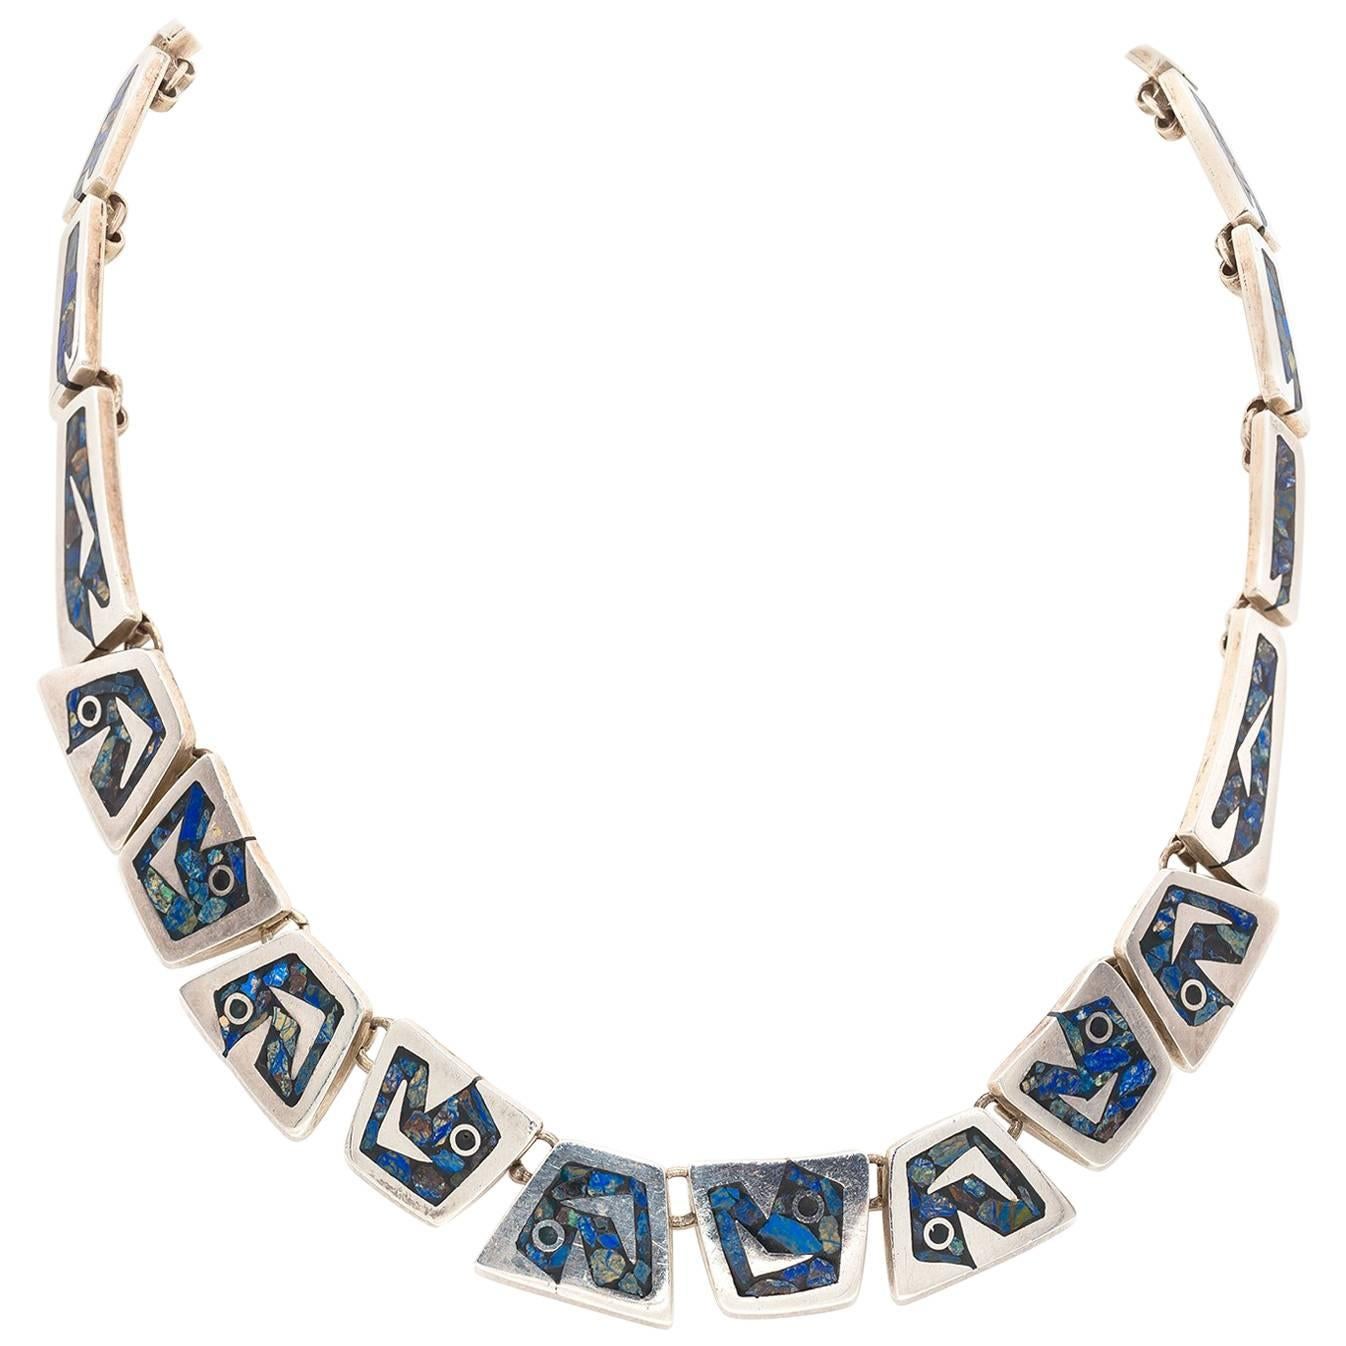 Handmade Mexican Sterling Silver Link Necklace with Lapis and Chrysicola Inlay